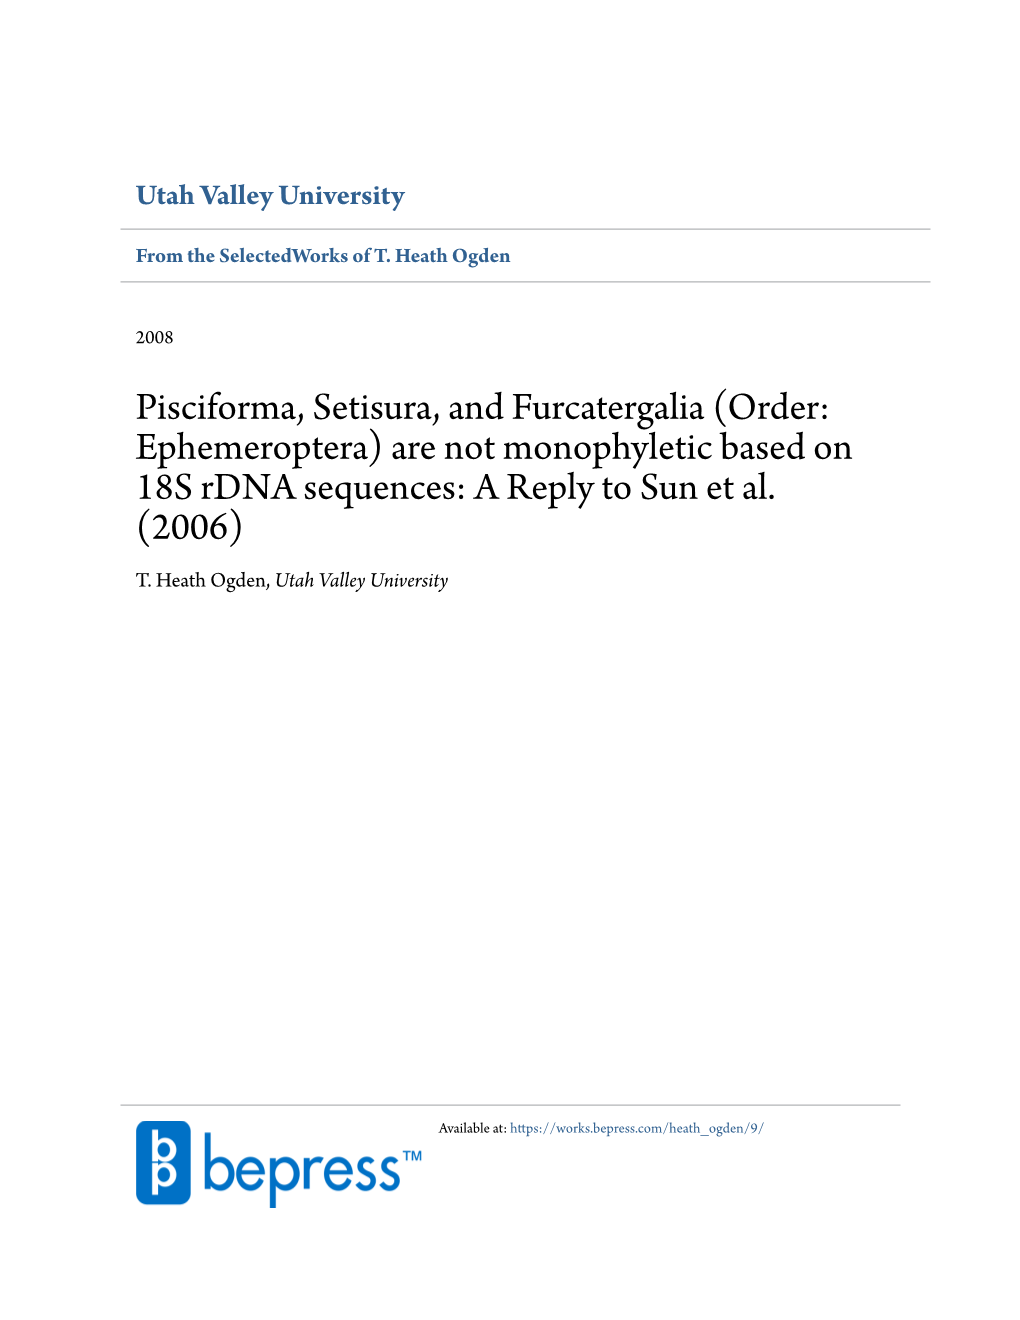 Pisciforma, Setisura, and Furcatergalia (Order: Ephemeroptera) Are Not Monophyletic Based on 18S Rdna Sequences: a Reply to Sun Et Al